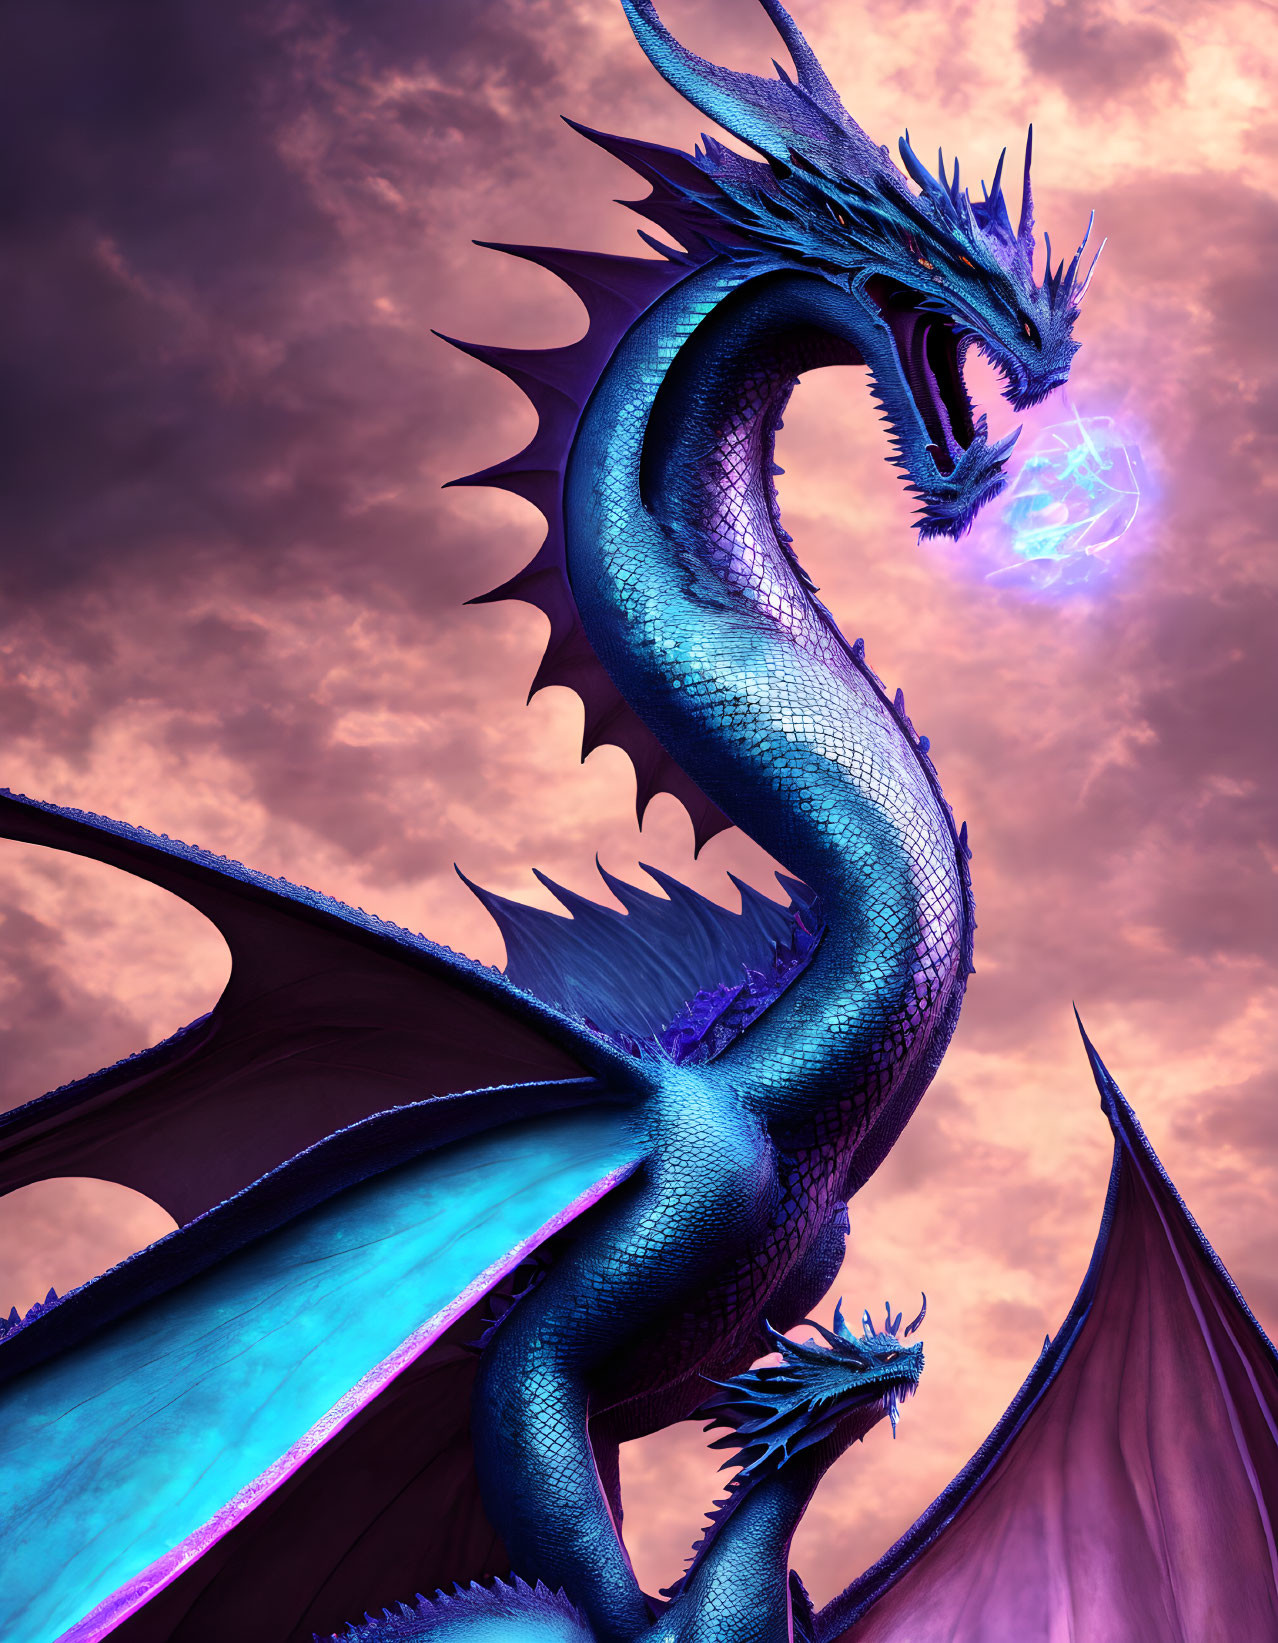 Blue dragon with glowing eyes and scales holding a mystical orb in a pink and purple sky